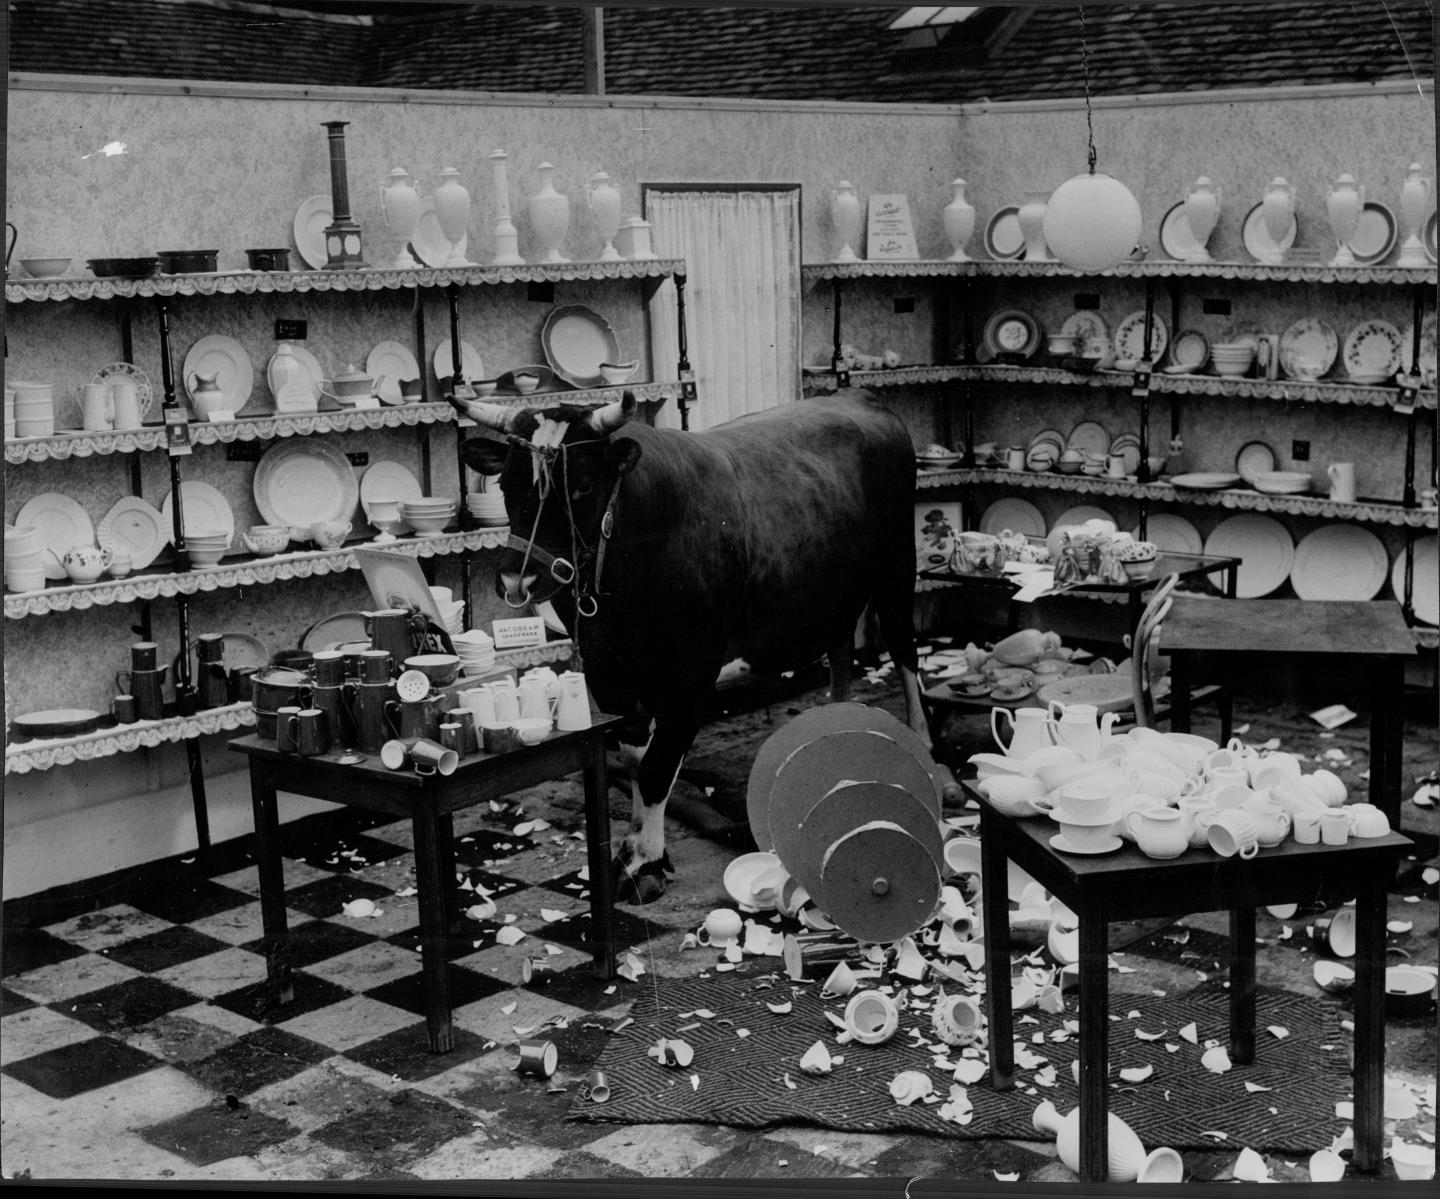 A picture of a bull in a china shop